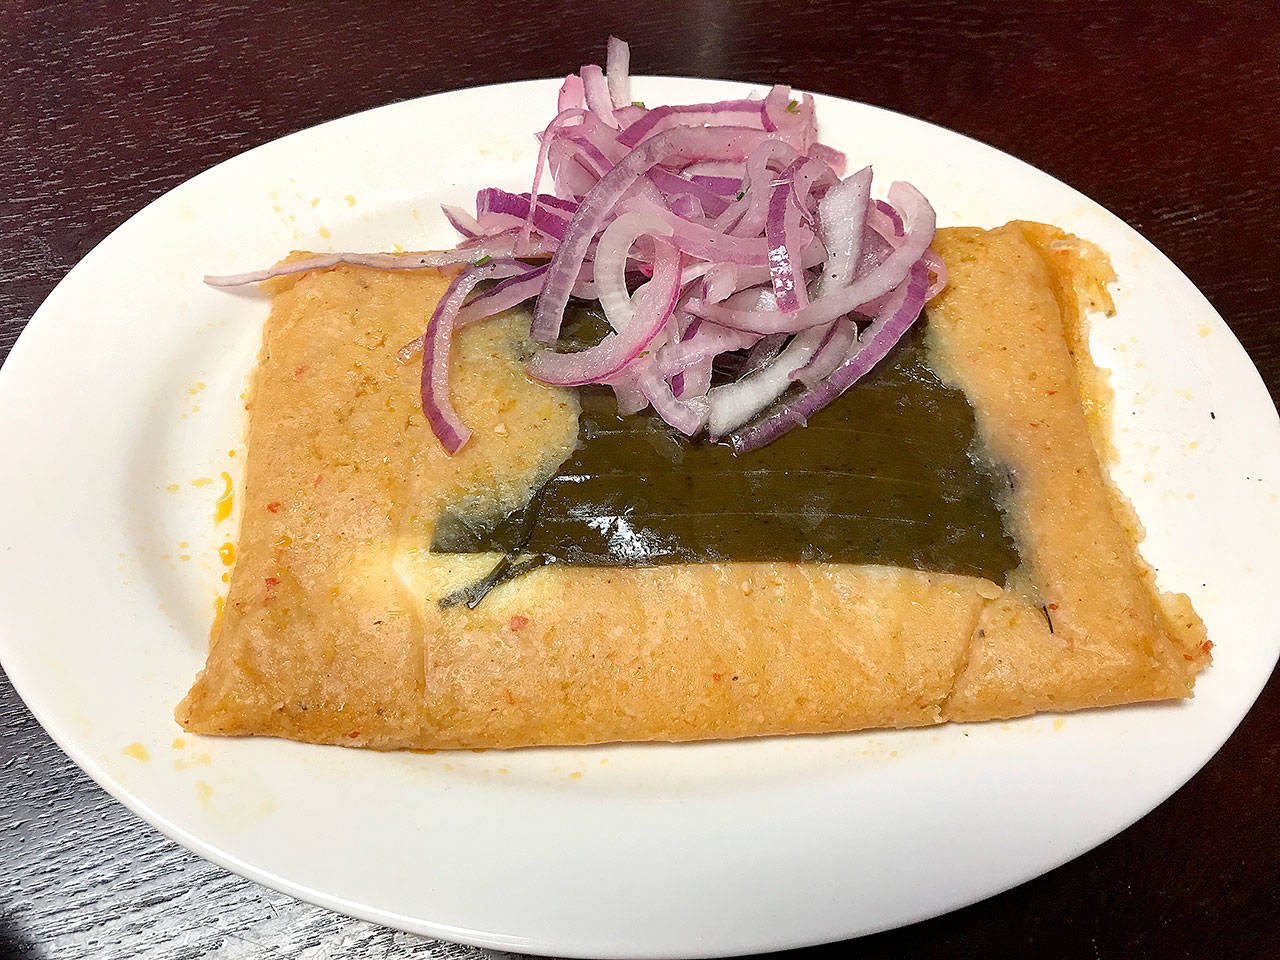 San Fernando’s tamale is a delicious blend of cornmeal, eggs and pork.